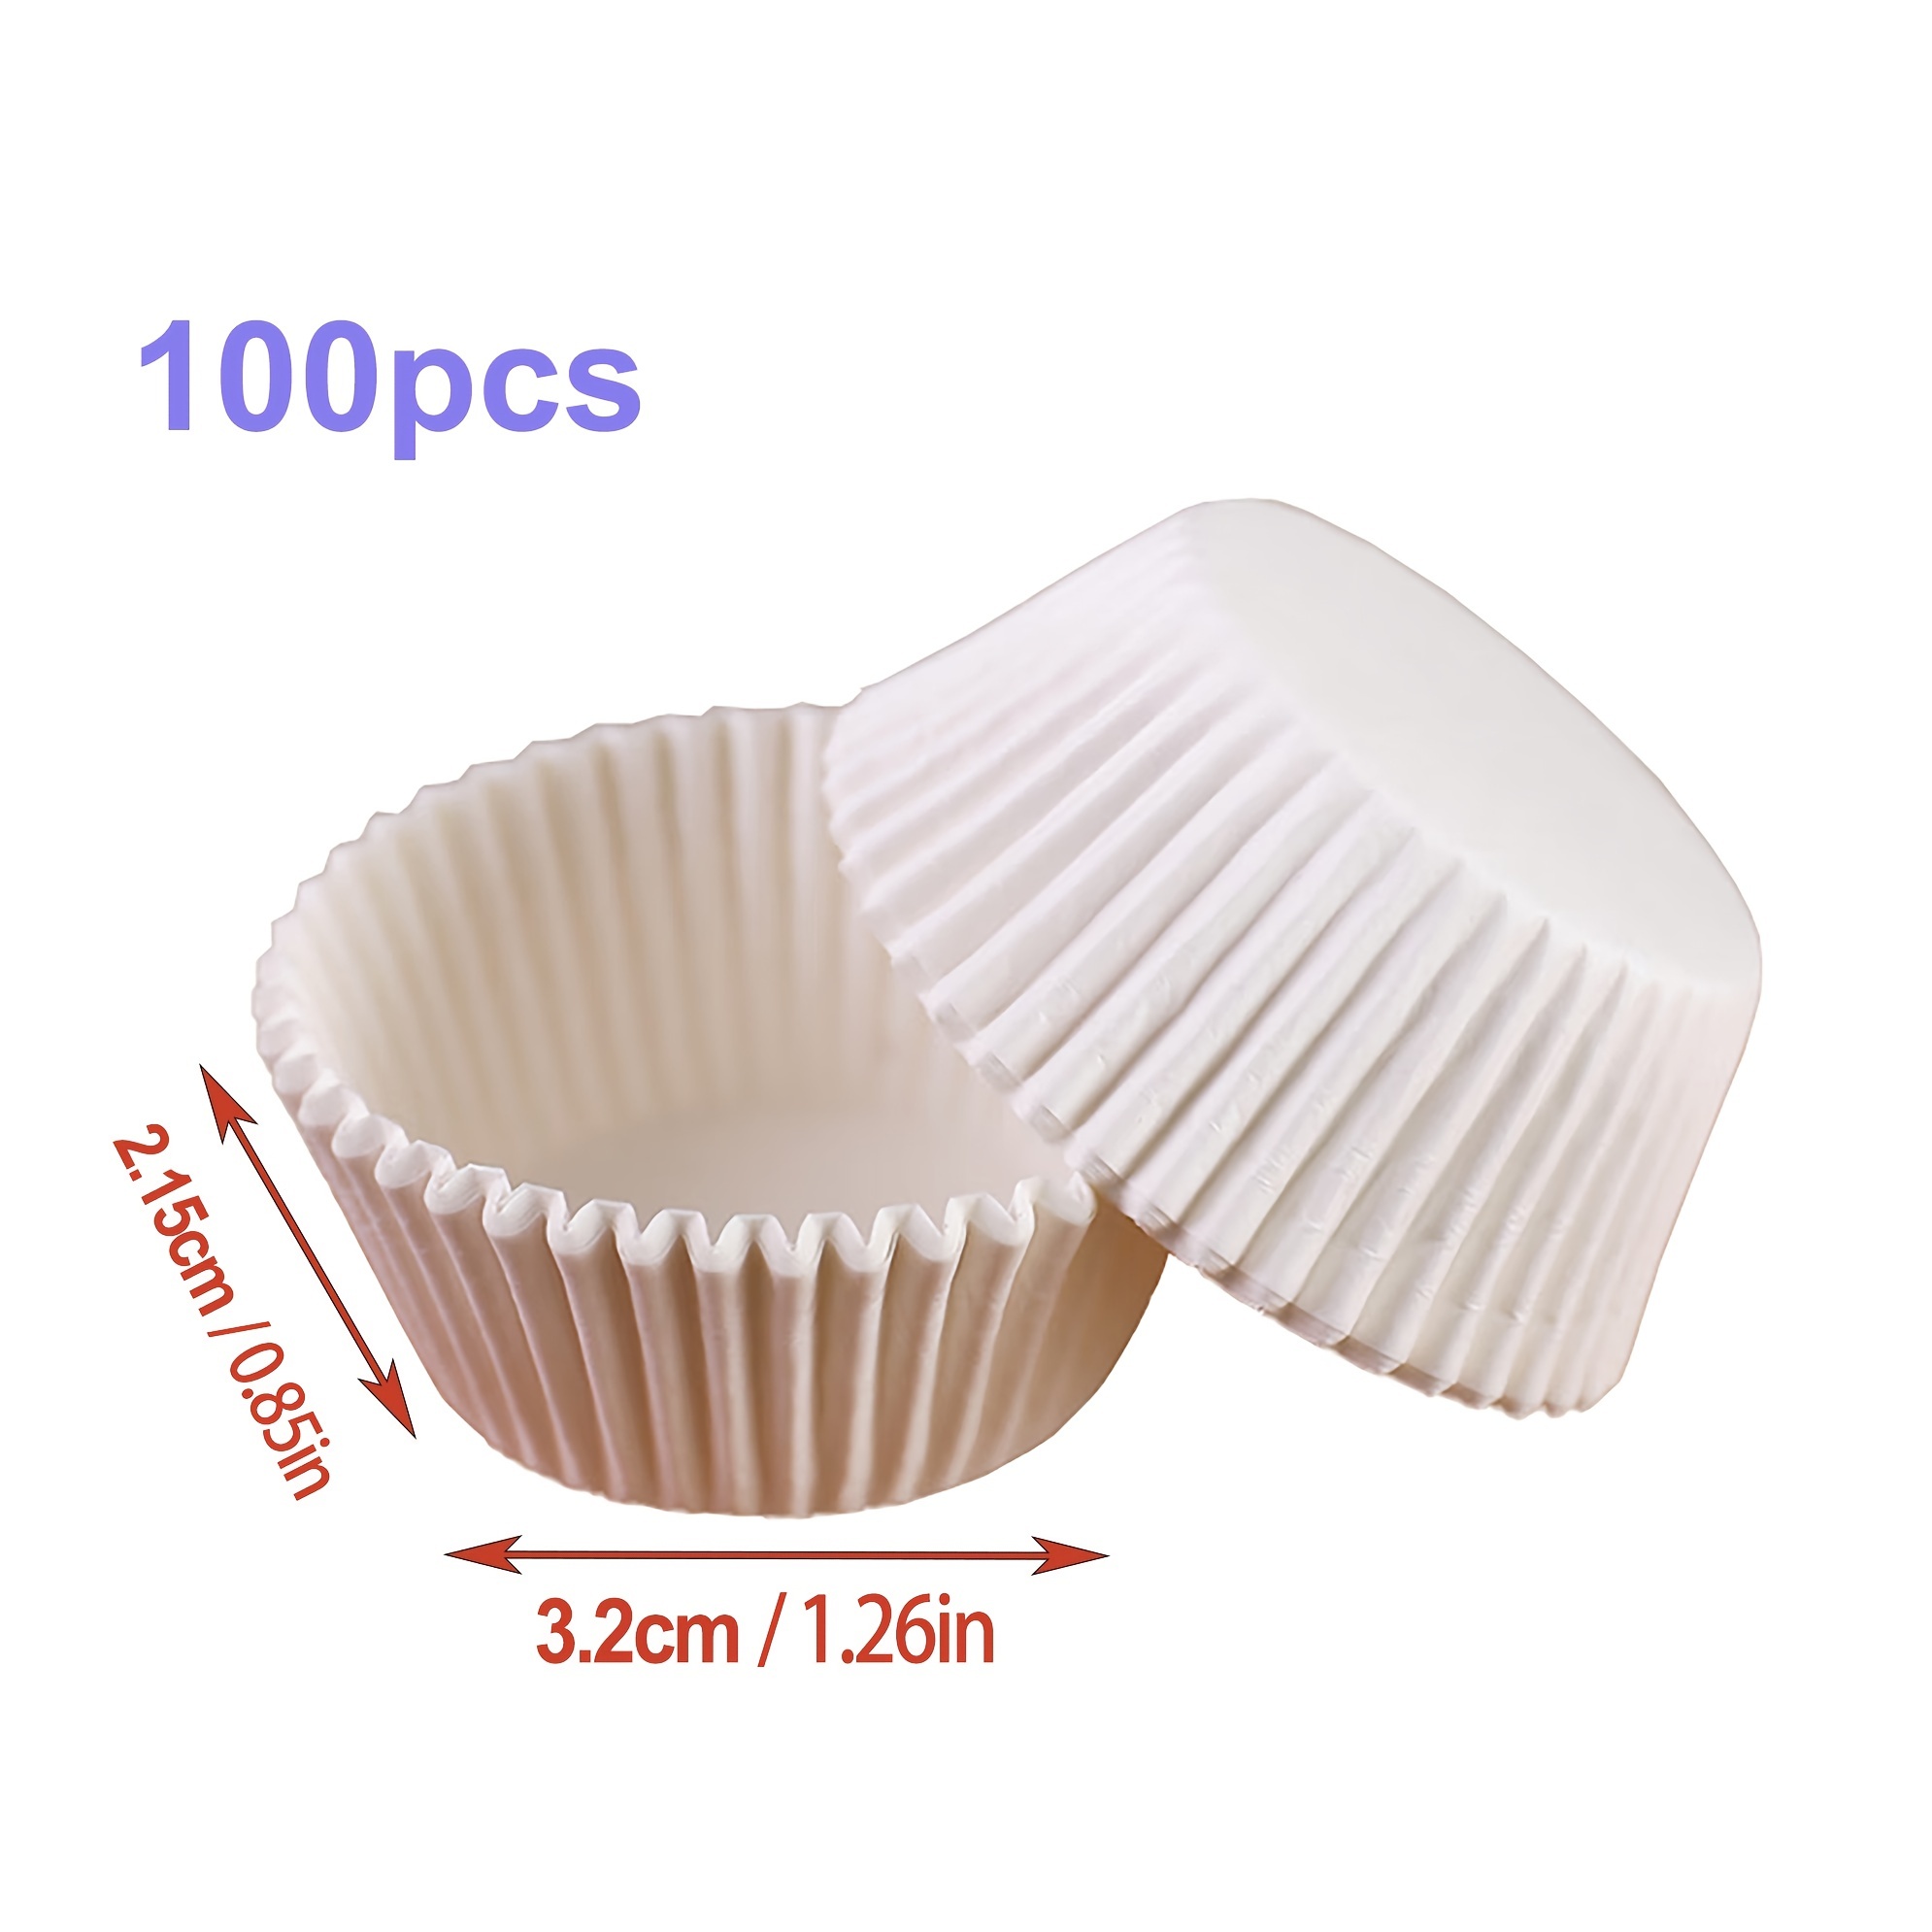 100 Pcs Mini Aluminum Foil Cupcake Liners Baking Cups Chocolate Cake Case  Base For Wedding Party Decoration